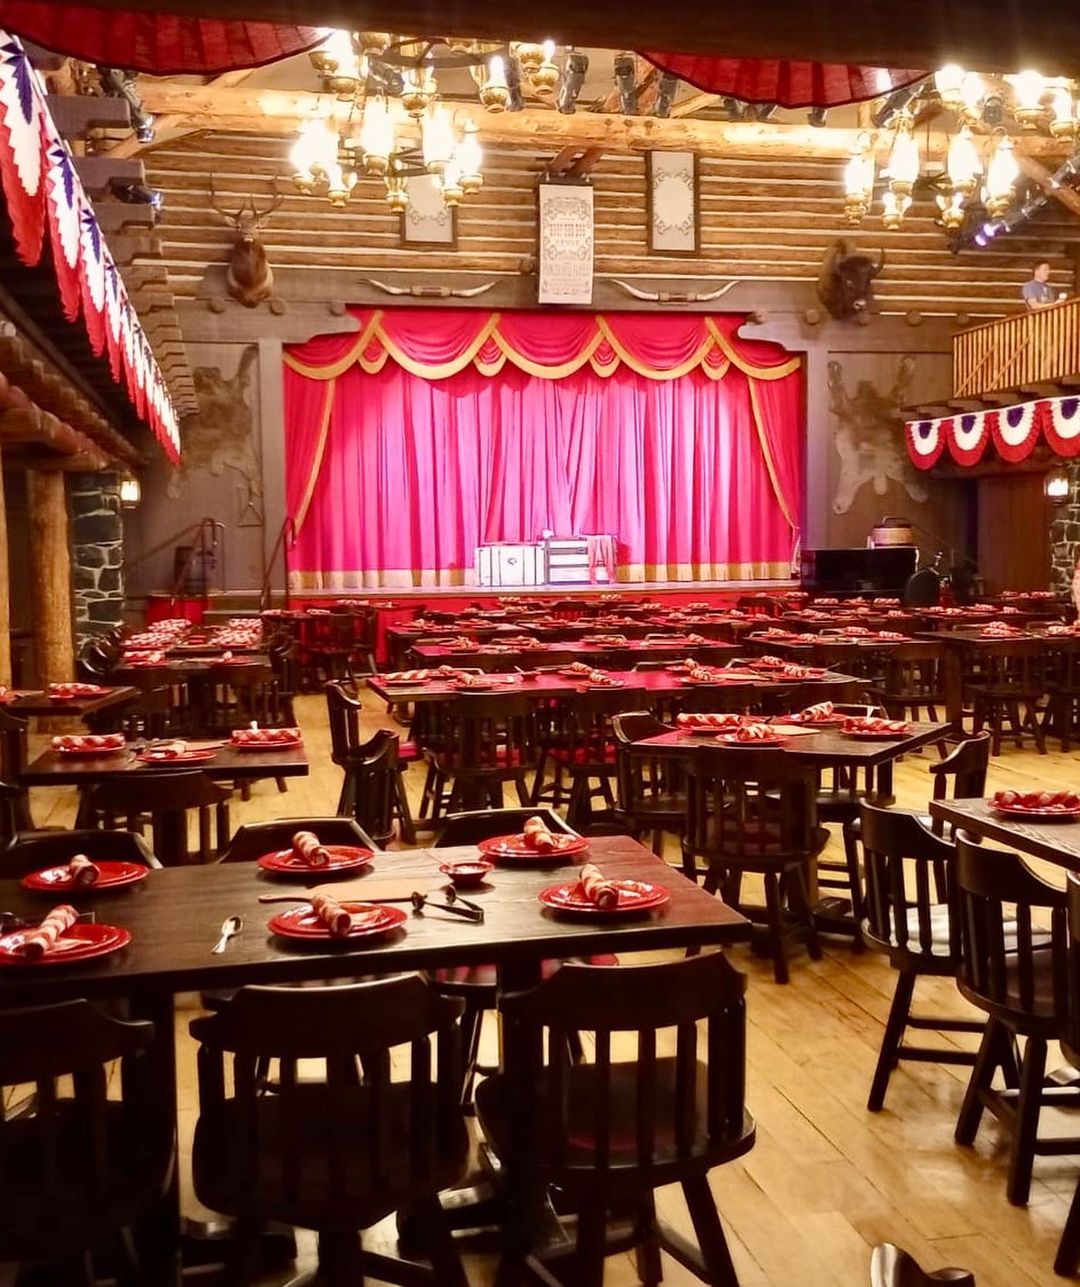 Hoop-Dee-Doo Musical Revue - Dining and Show at Disney (Fort Wilderness)